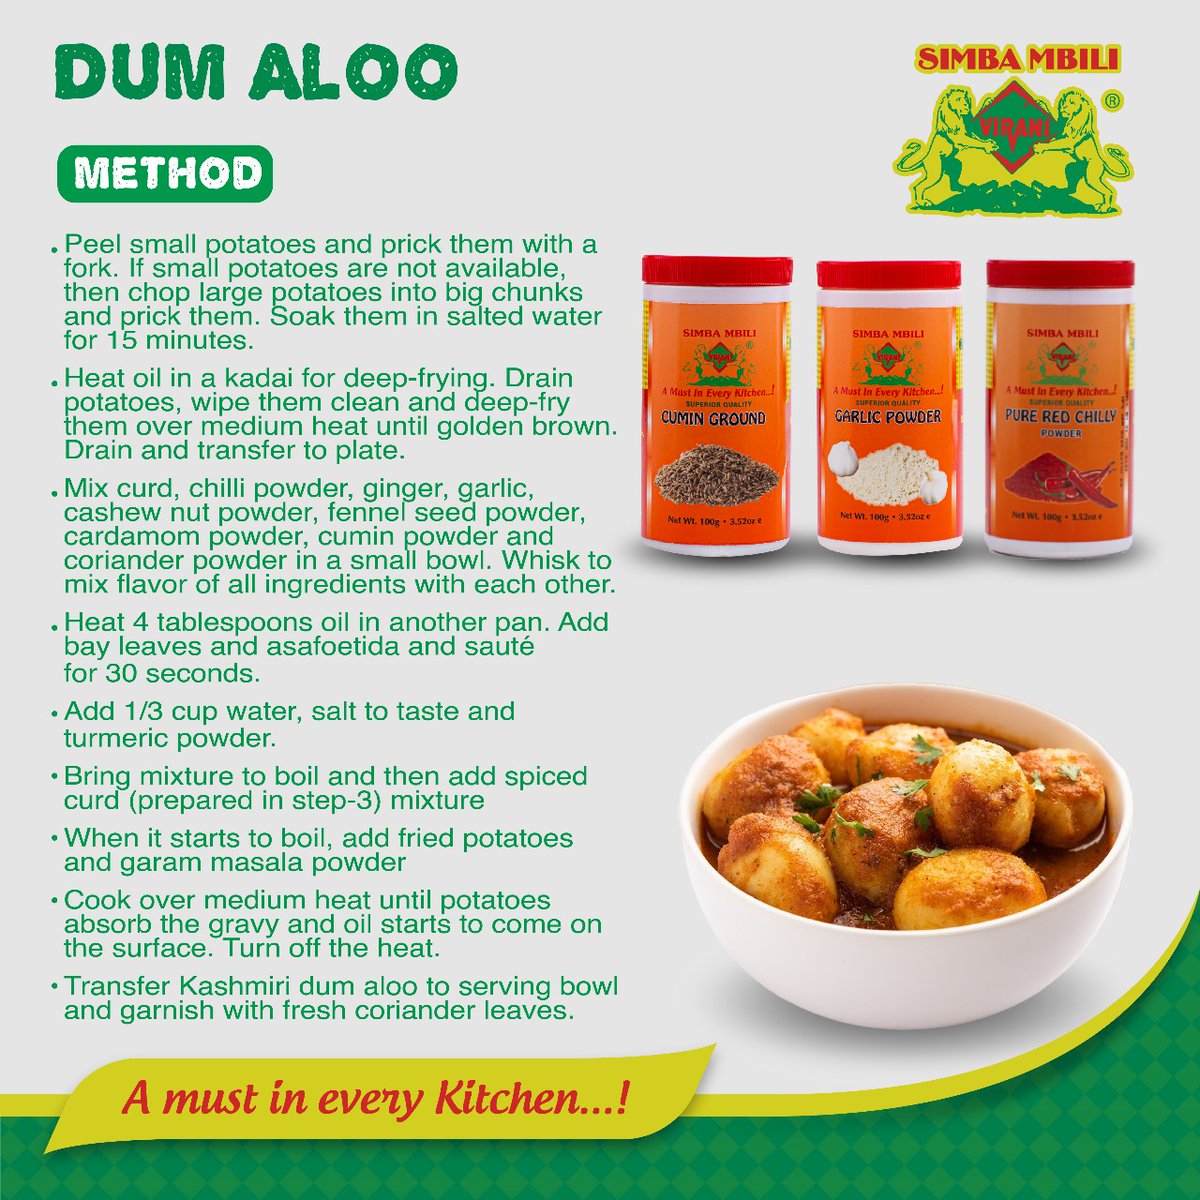 Have you tastes Dum Aloo before? Let's help you create yours today.
#DumAloo #SimbaMbili #SpiceRecipes #CookingTips #DeliciousDishes